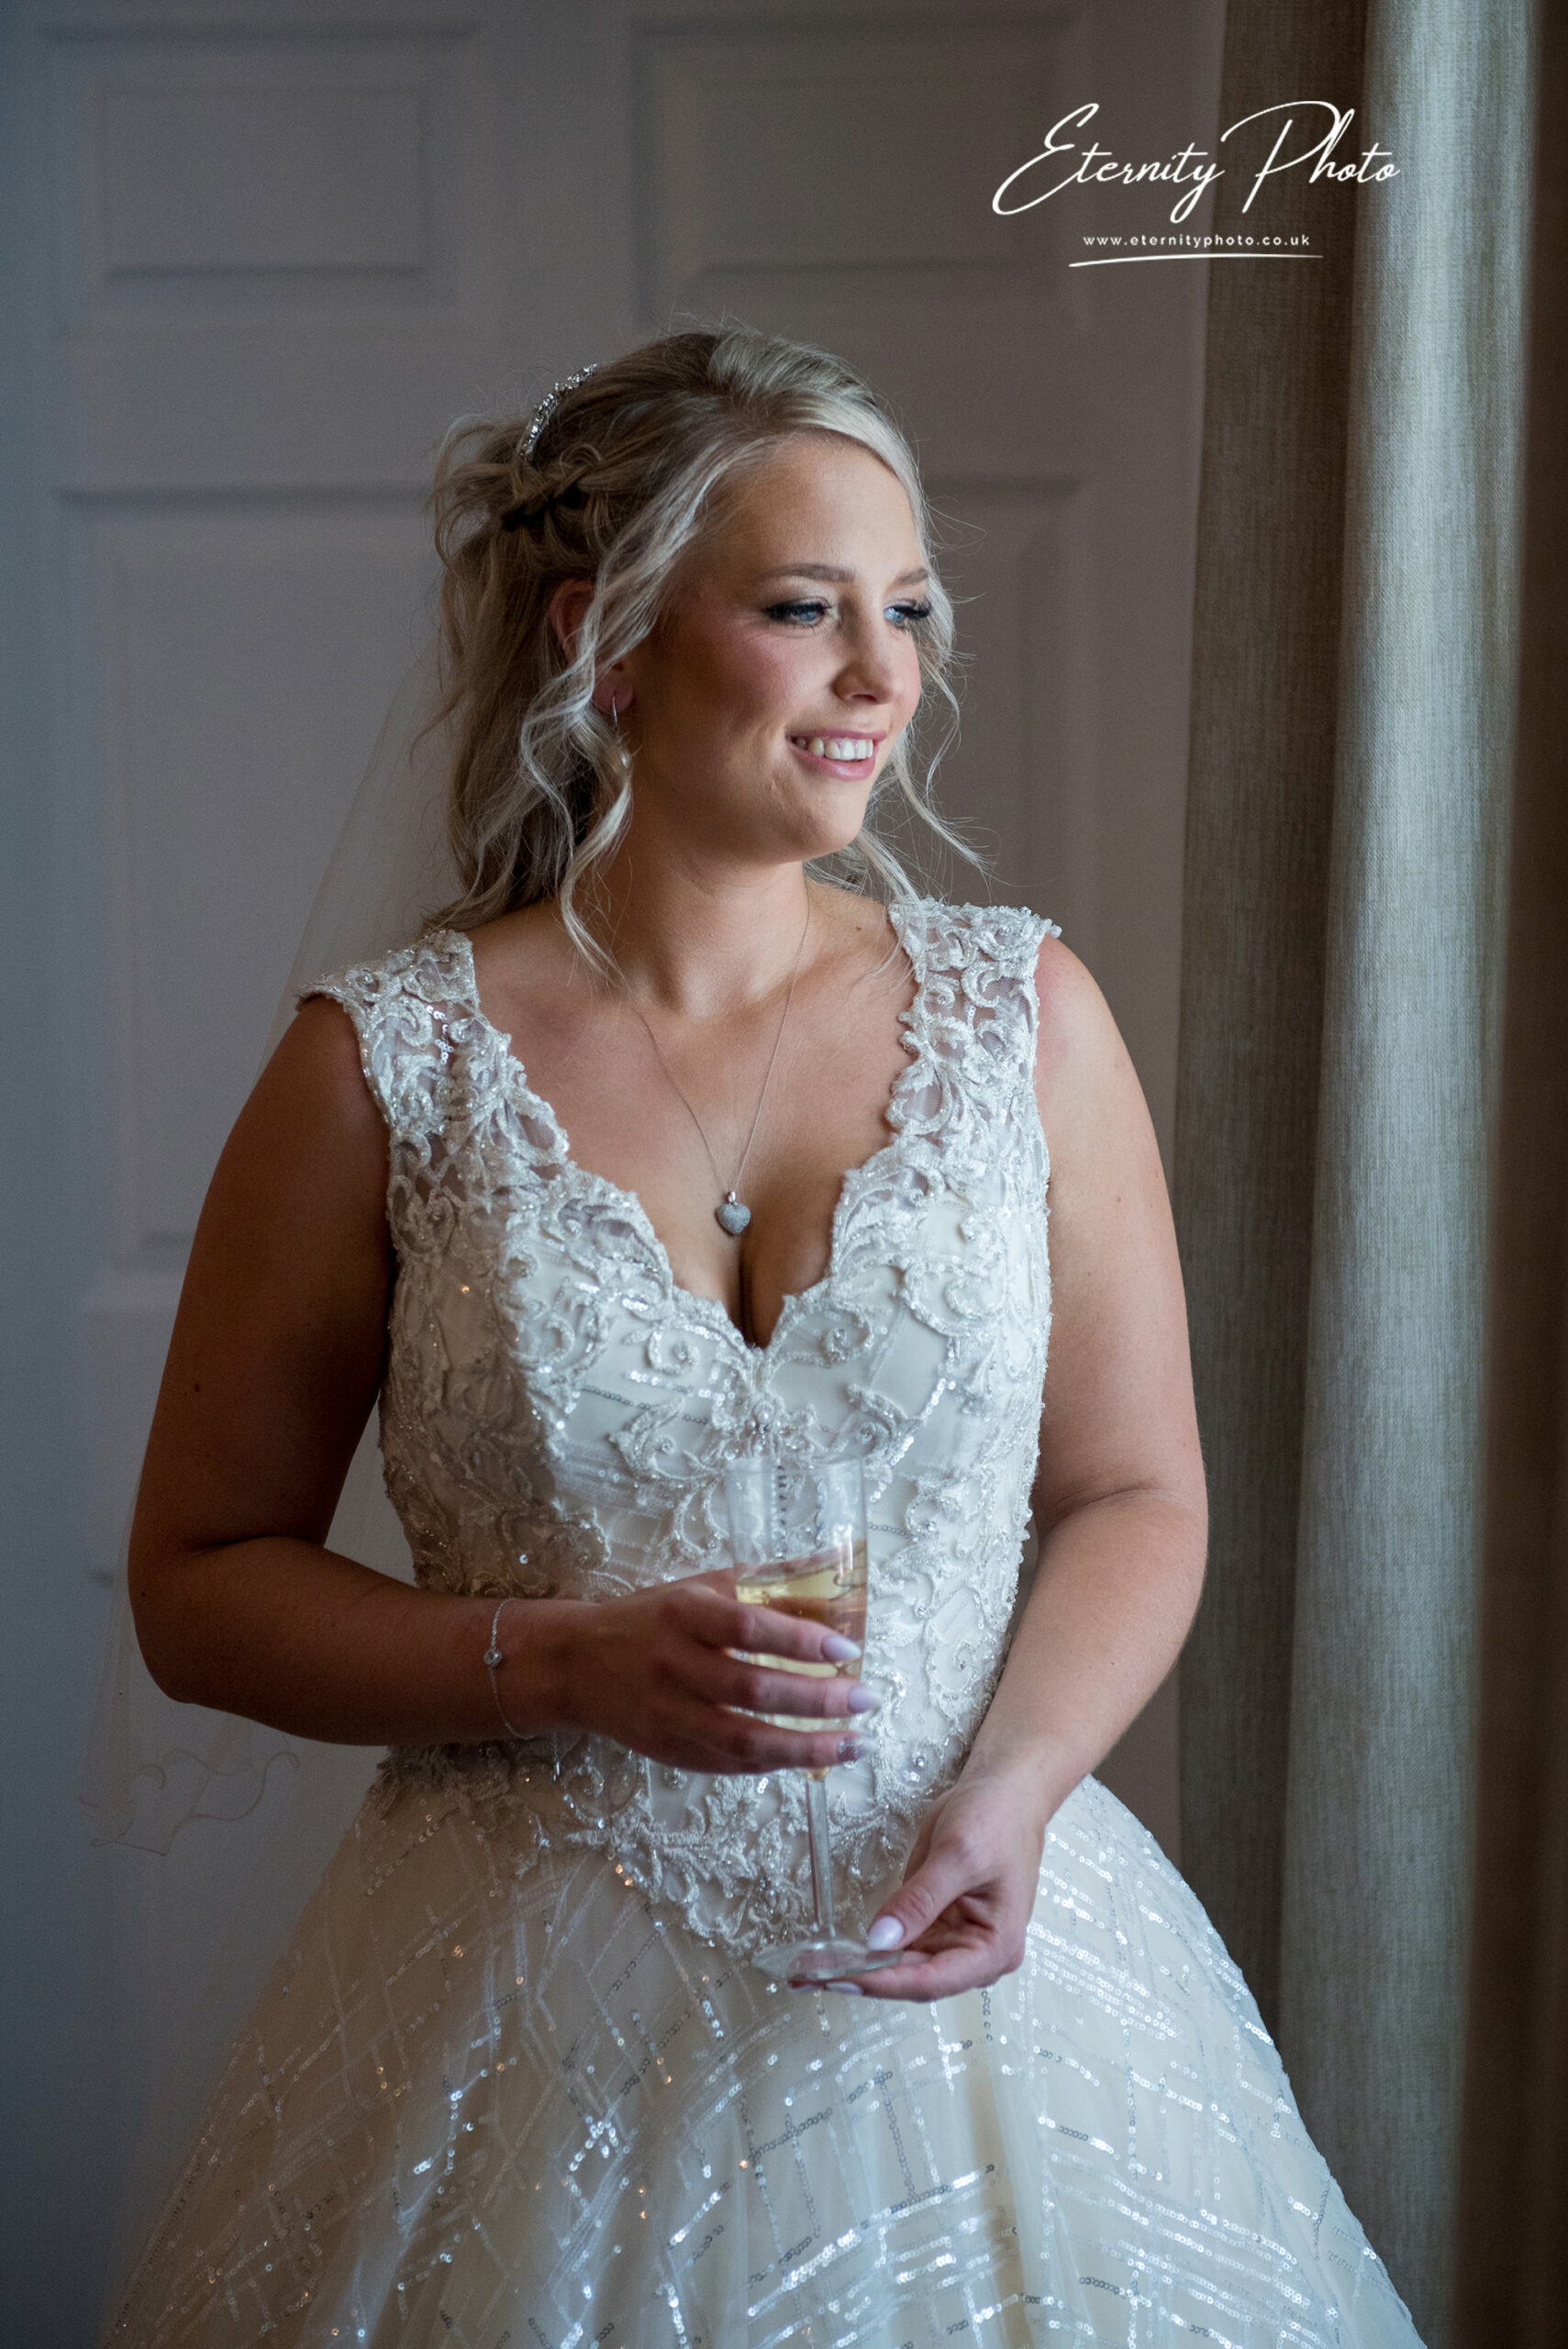 Bride in white dress smiling with champagne glass.